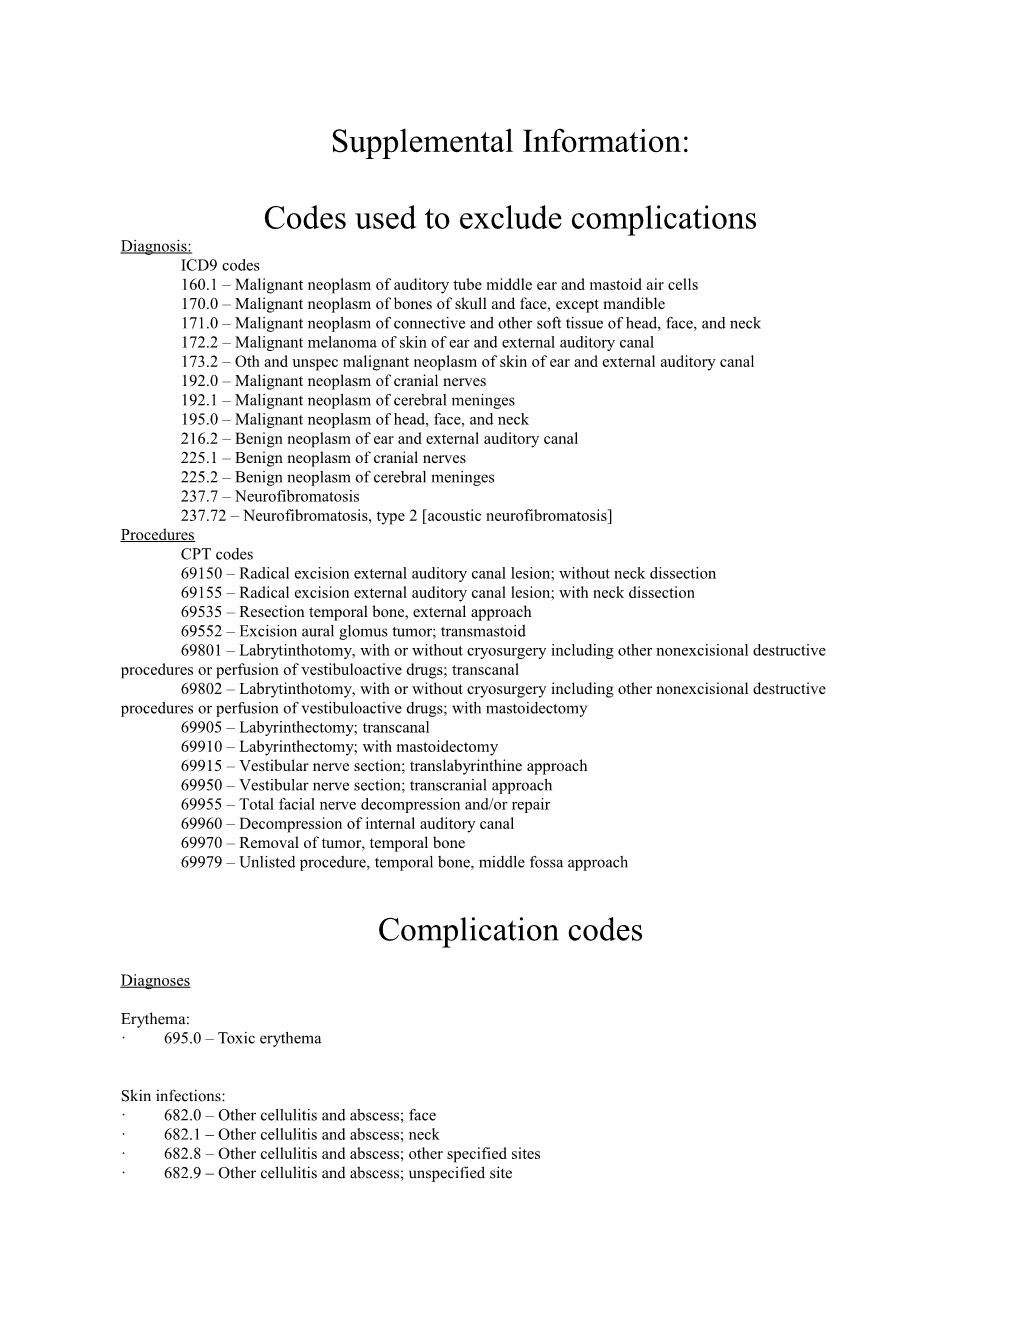 Codes Used to Exclude Complications